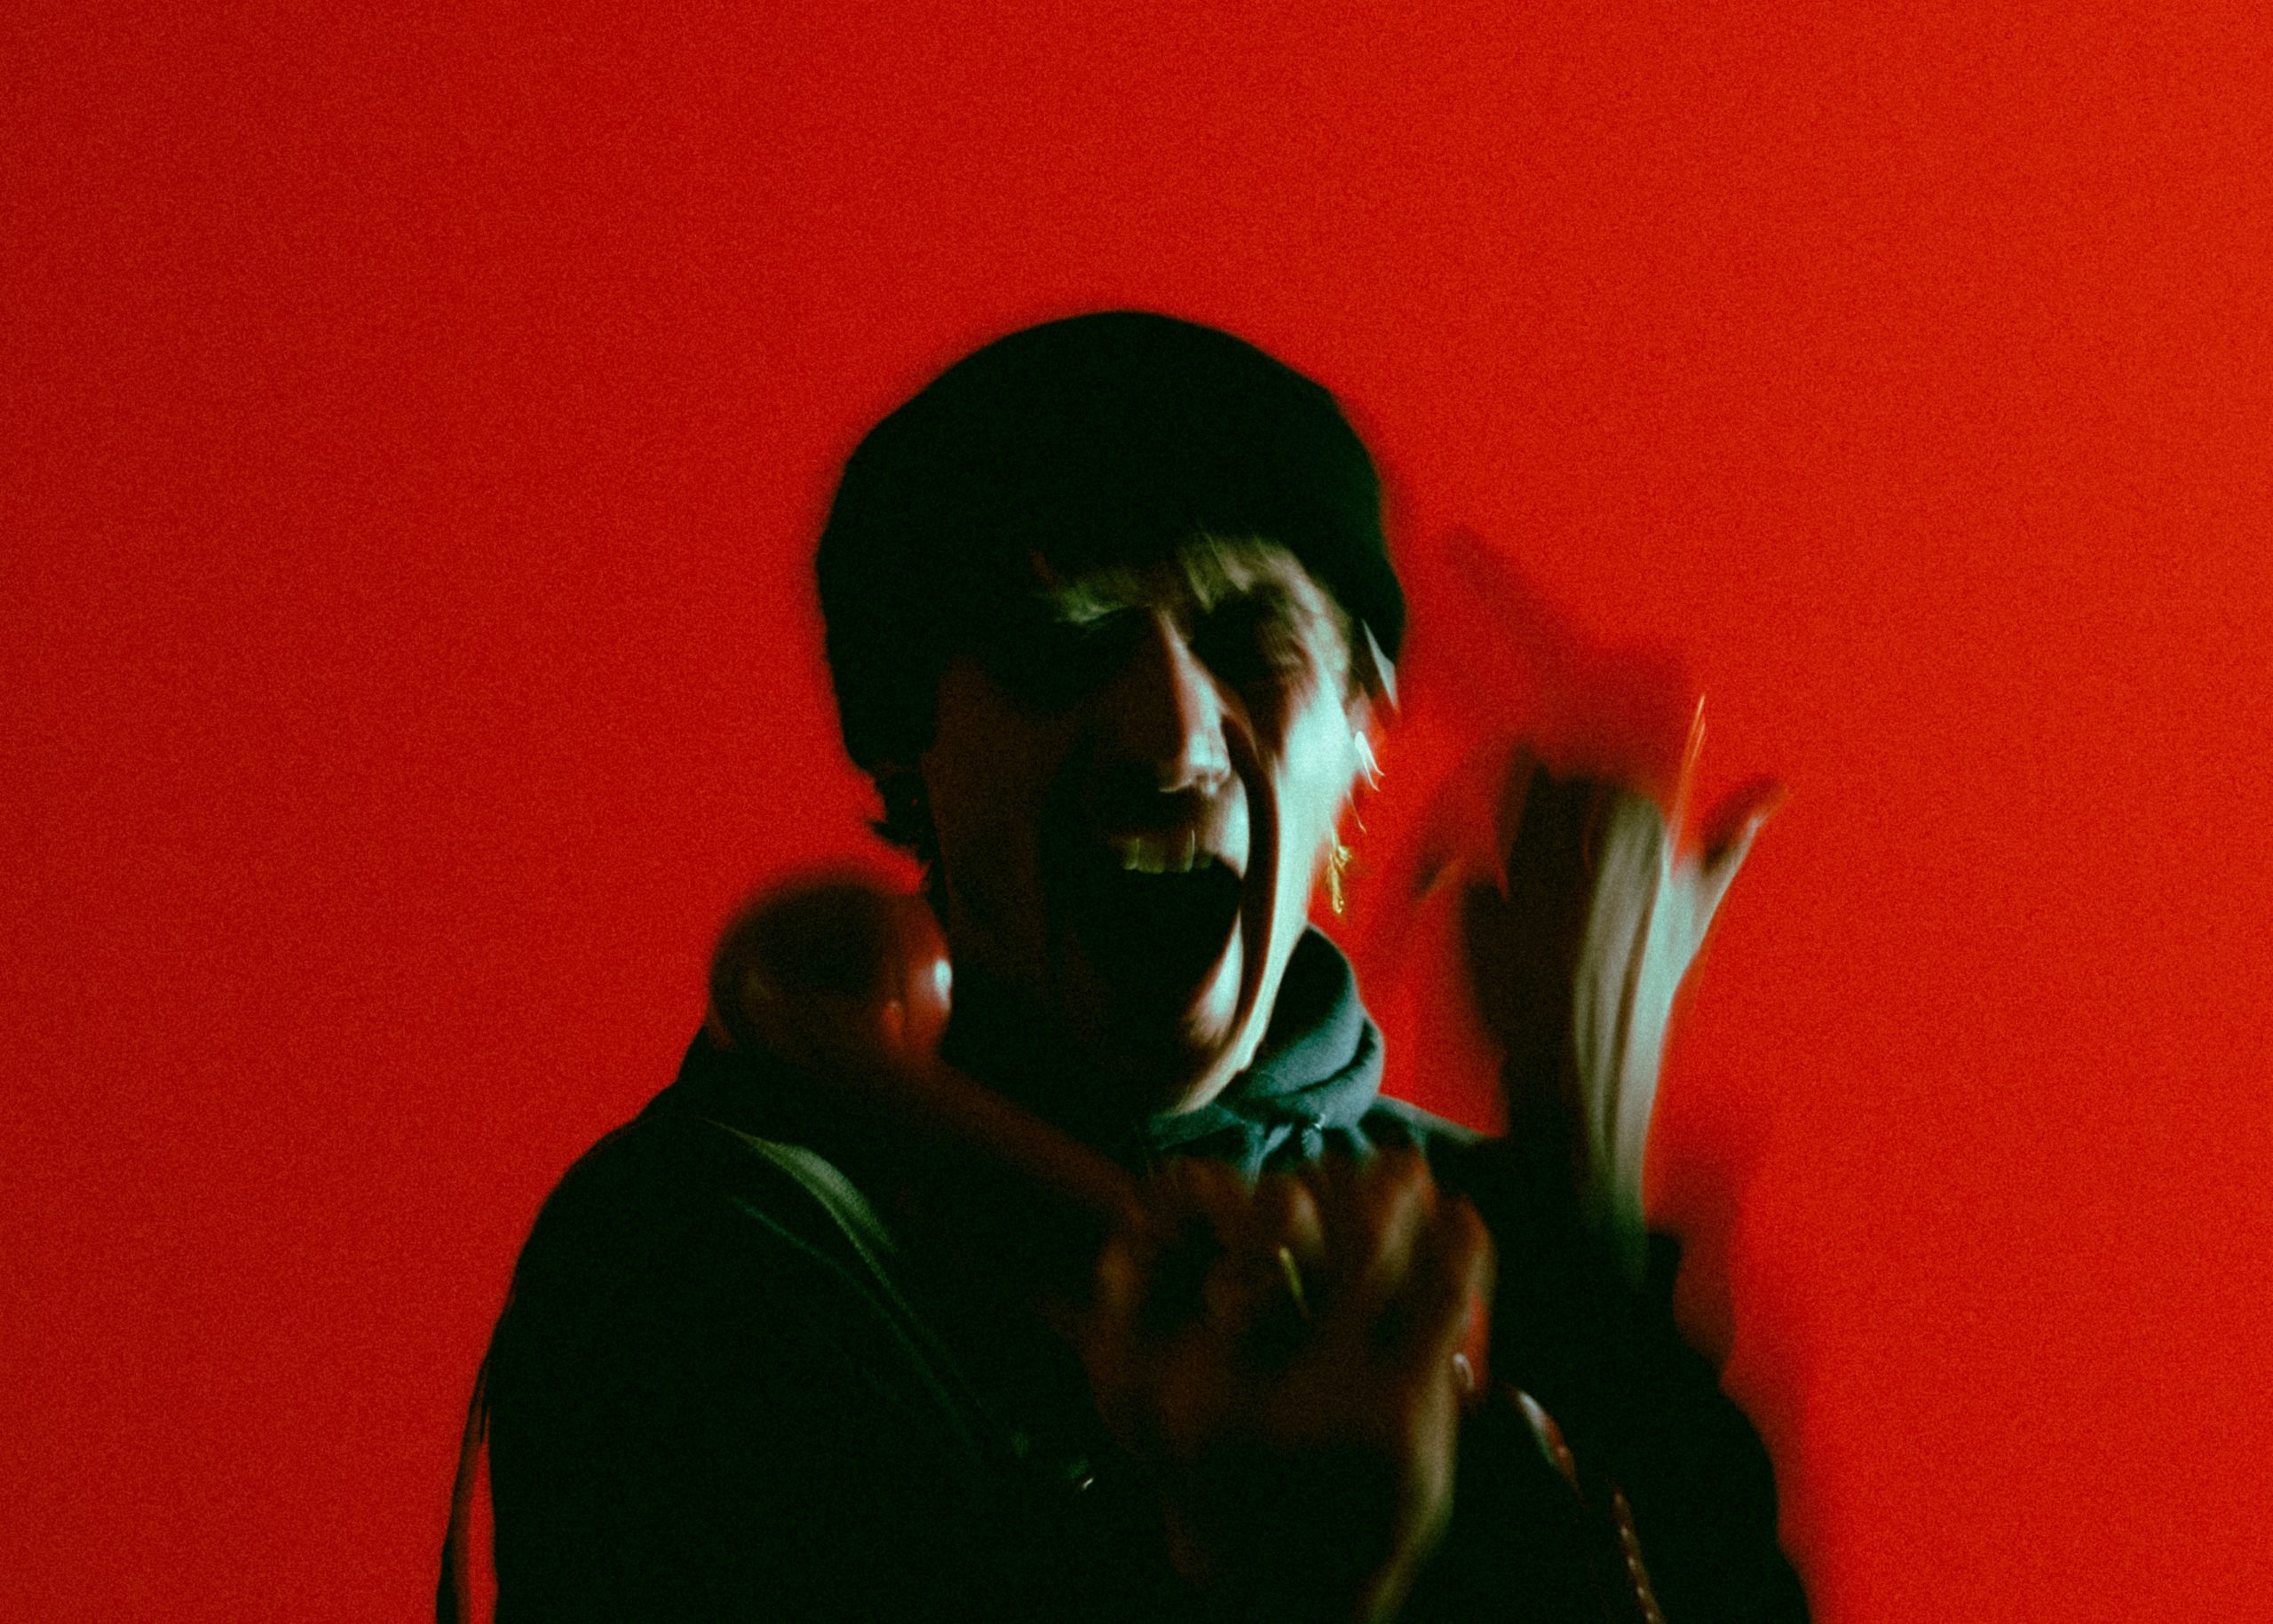 A blurry photo of a man yelling against a red background.